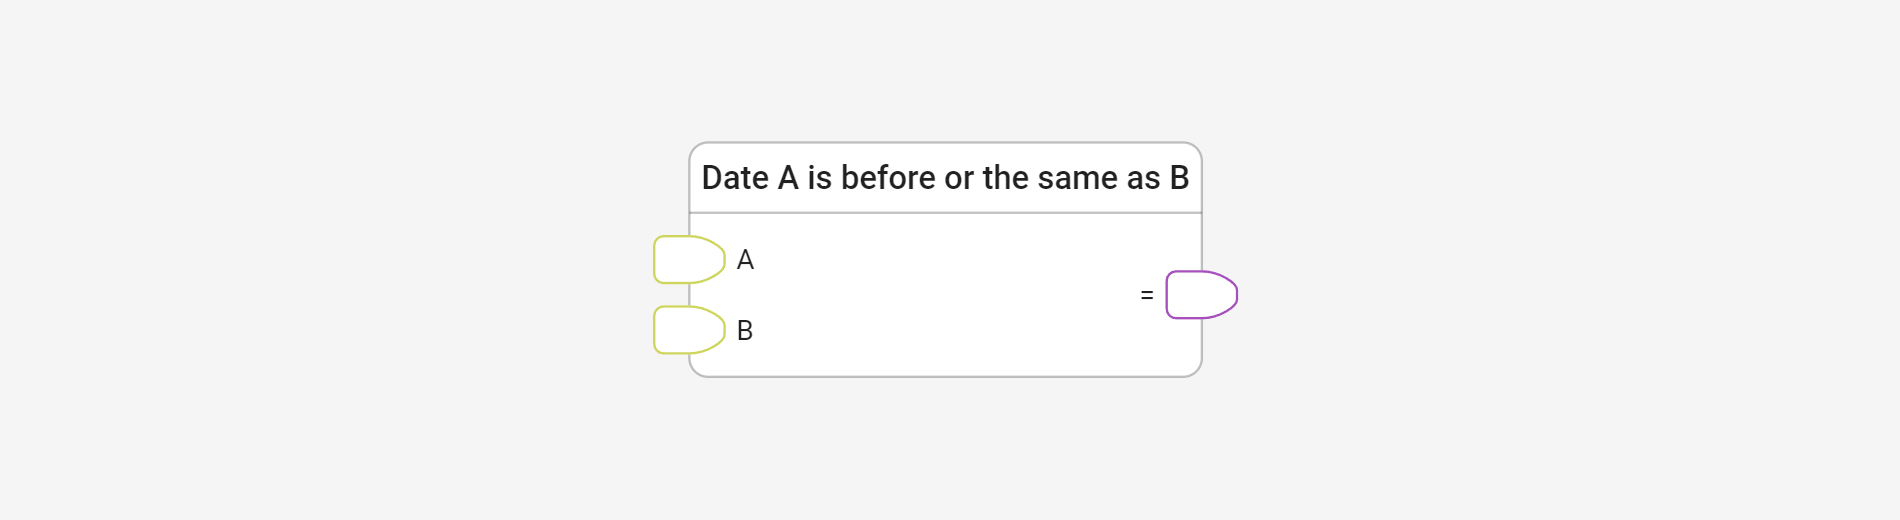 Check date using Date A is before or the same as B